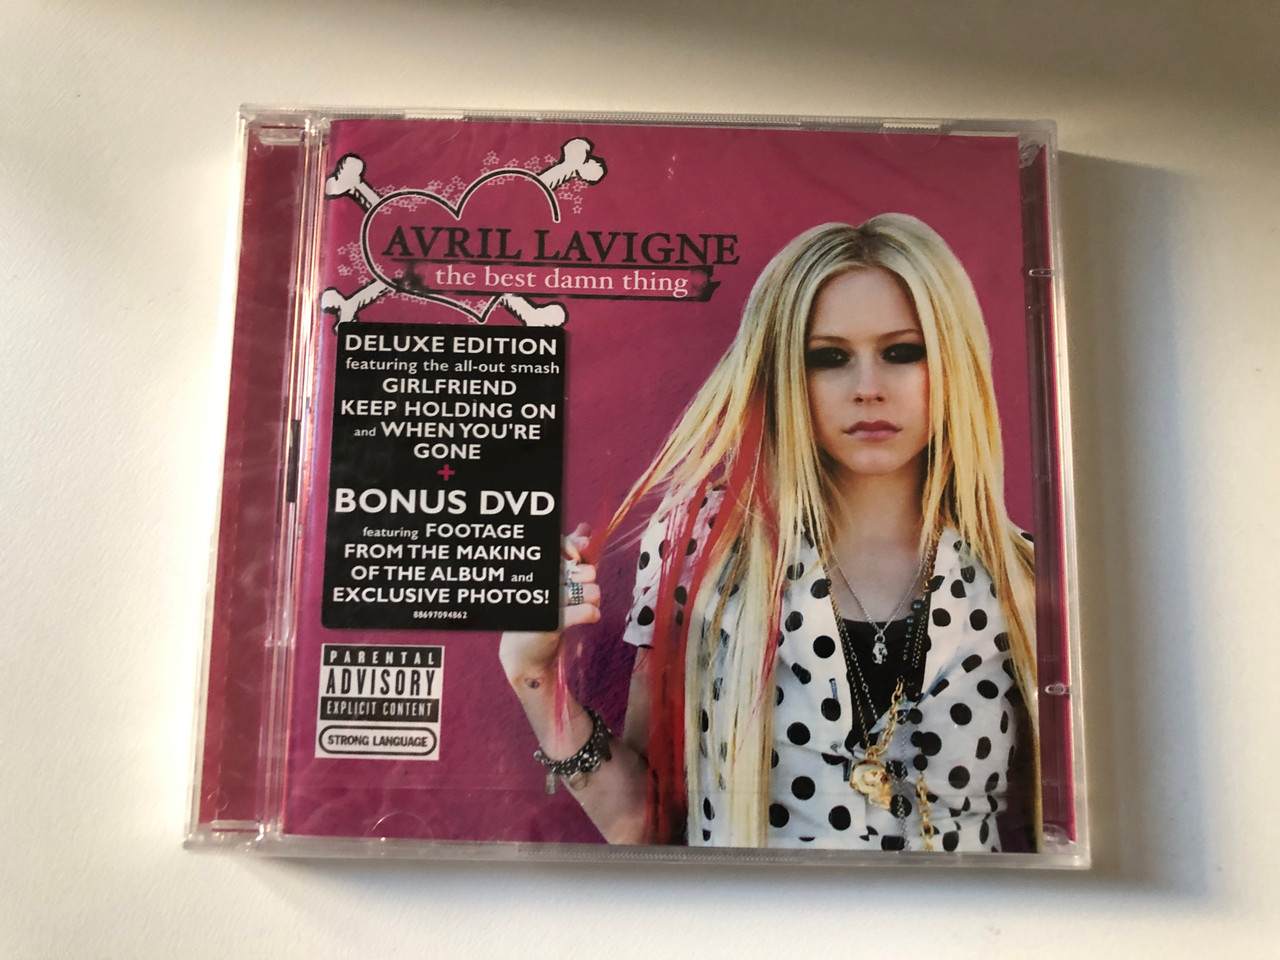 https://cdn10.bigcommerce.com/s-62bdpkt7pb/products/0/images/206351/Avril_Lavigne_The_Best_Damn_Thing_Deluxe_Edition._Featuring_the_all-out_smash_Girlfriend_Keep_Holding_On_and_When_Youre_Gone_Bonus_DVD_featuring_Footage_From_The_Making_Of_The_Al_1__05027.1641981174.1280.1280.JPG?c=2&_gl=1*18ycyi4*_ga*MjA2NTIxMjE2MC4xNTkwNTEyNTMy*_ga_WS2VZYPC6G*MTY0MTk4MDMxNy4yNTcuMS4xNjQxOTgwOTY3LjUy